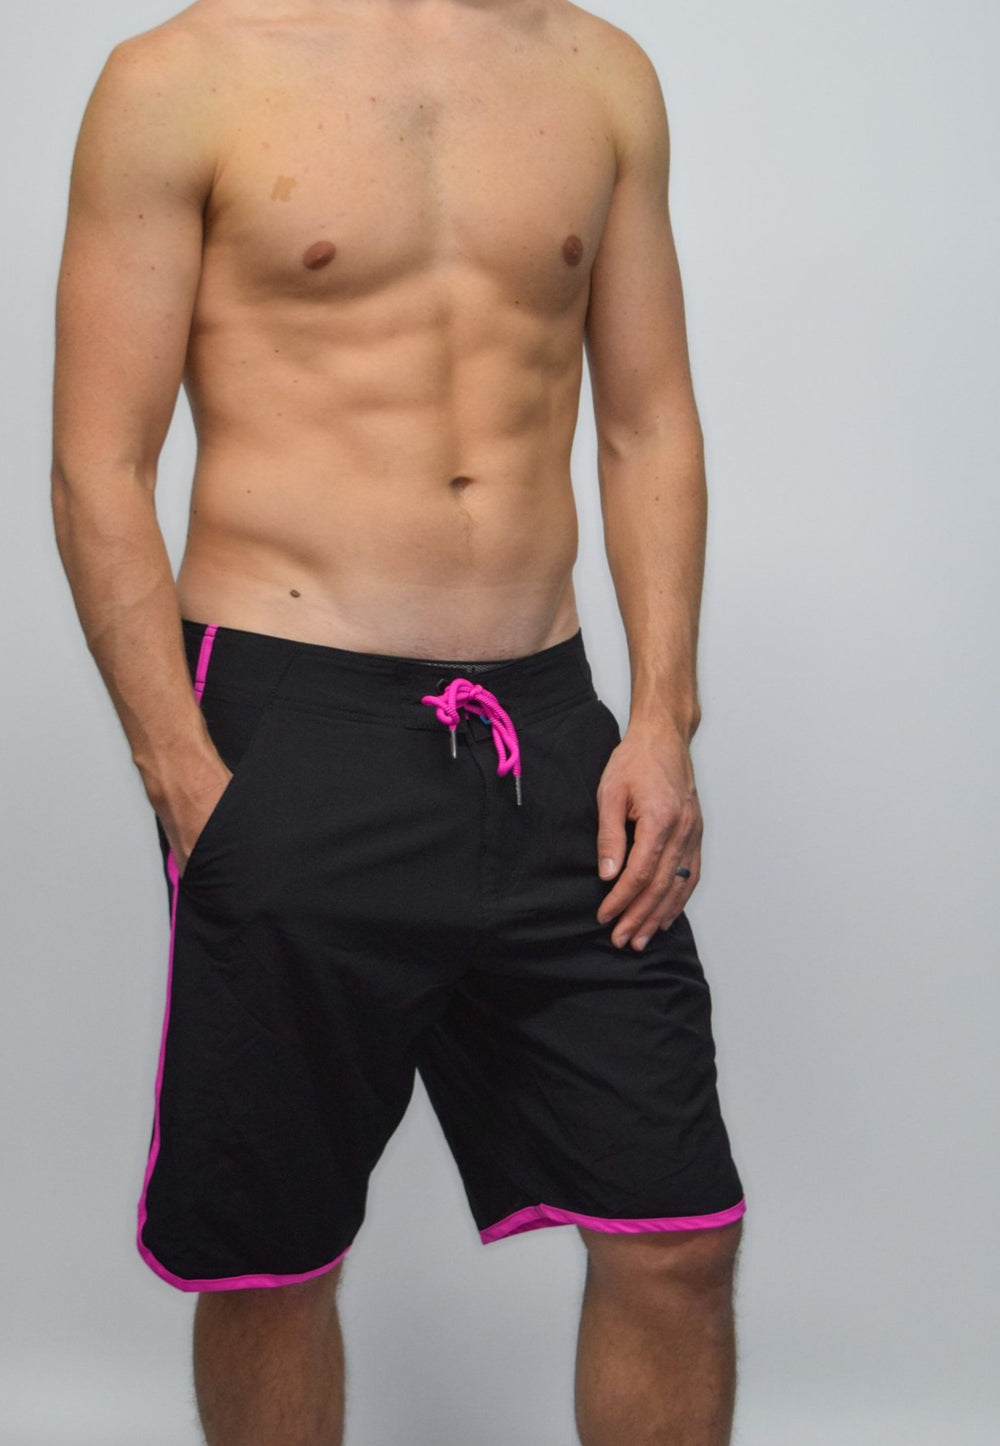 Men’s Competition Hybrid Shorts in Pink